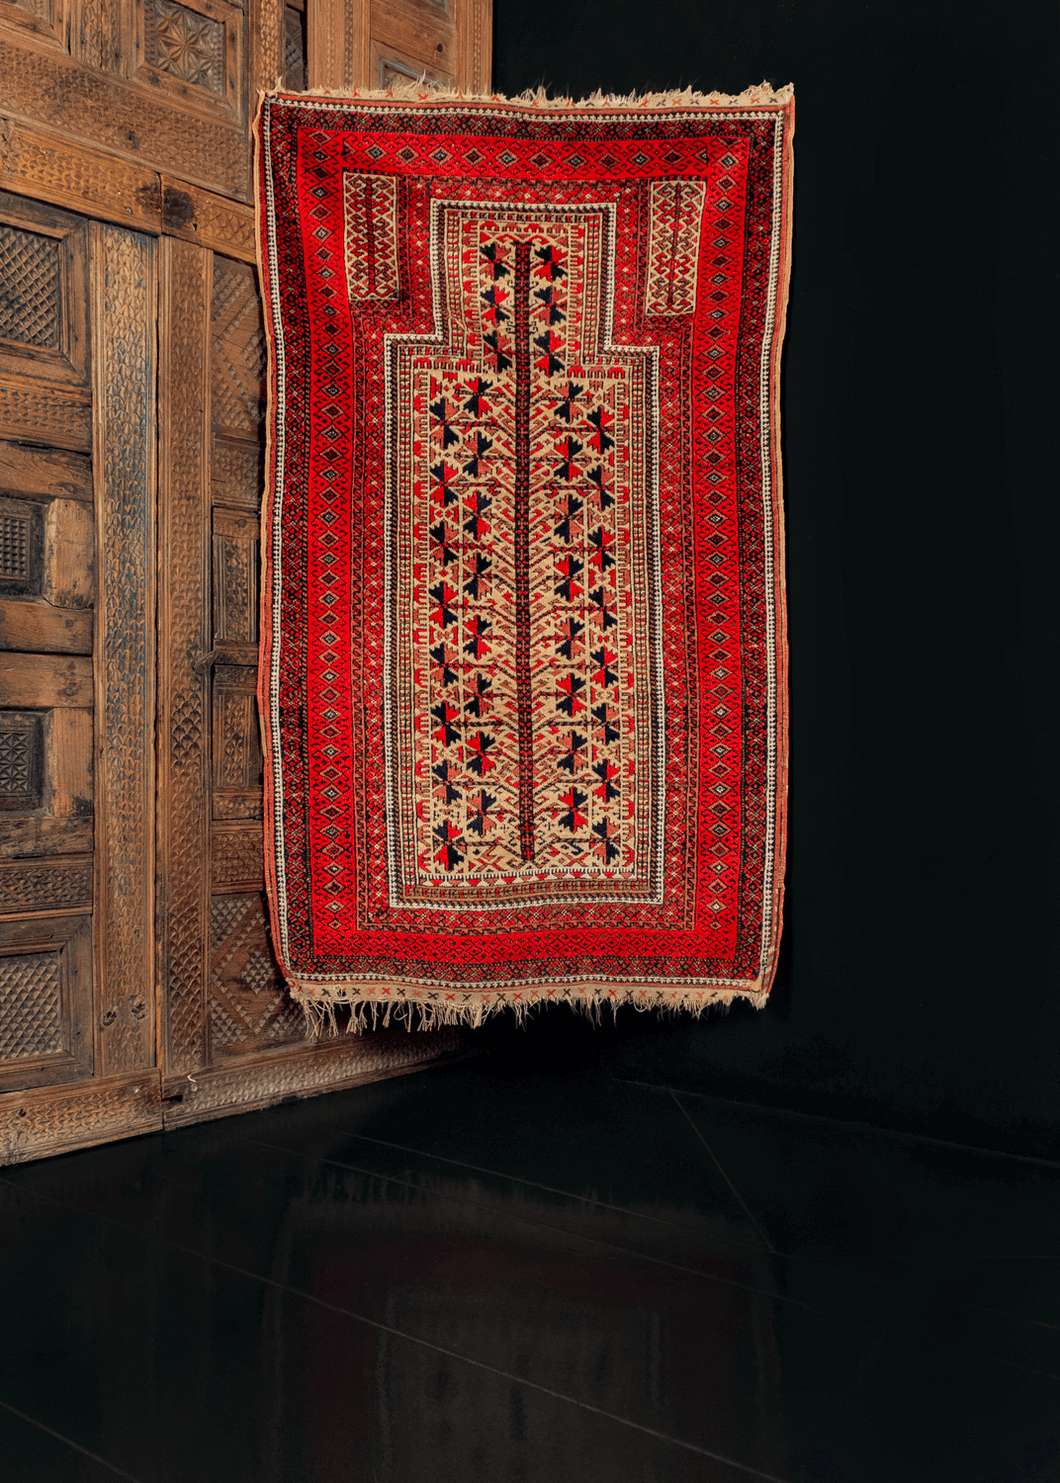 Baluch prayer rug with tree of life motif, in camel, red, black, and white. early 20th century from Afghanistan